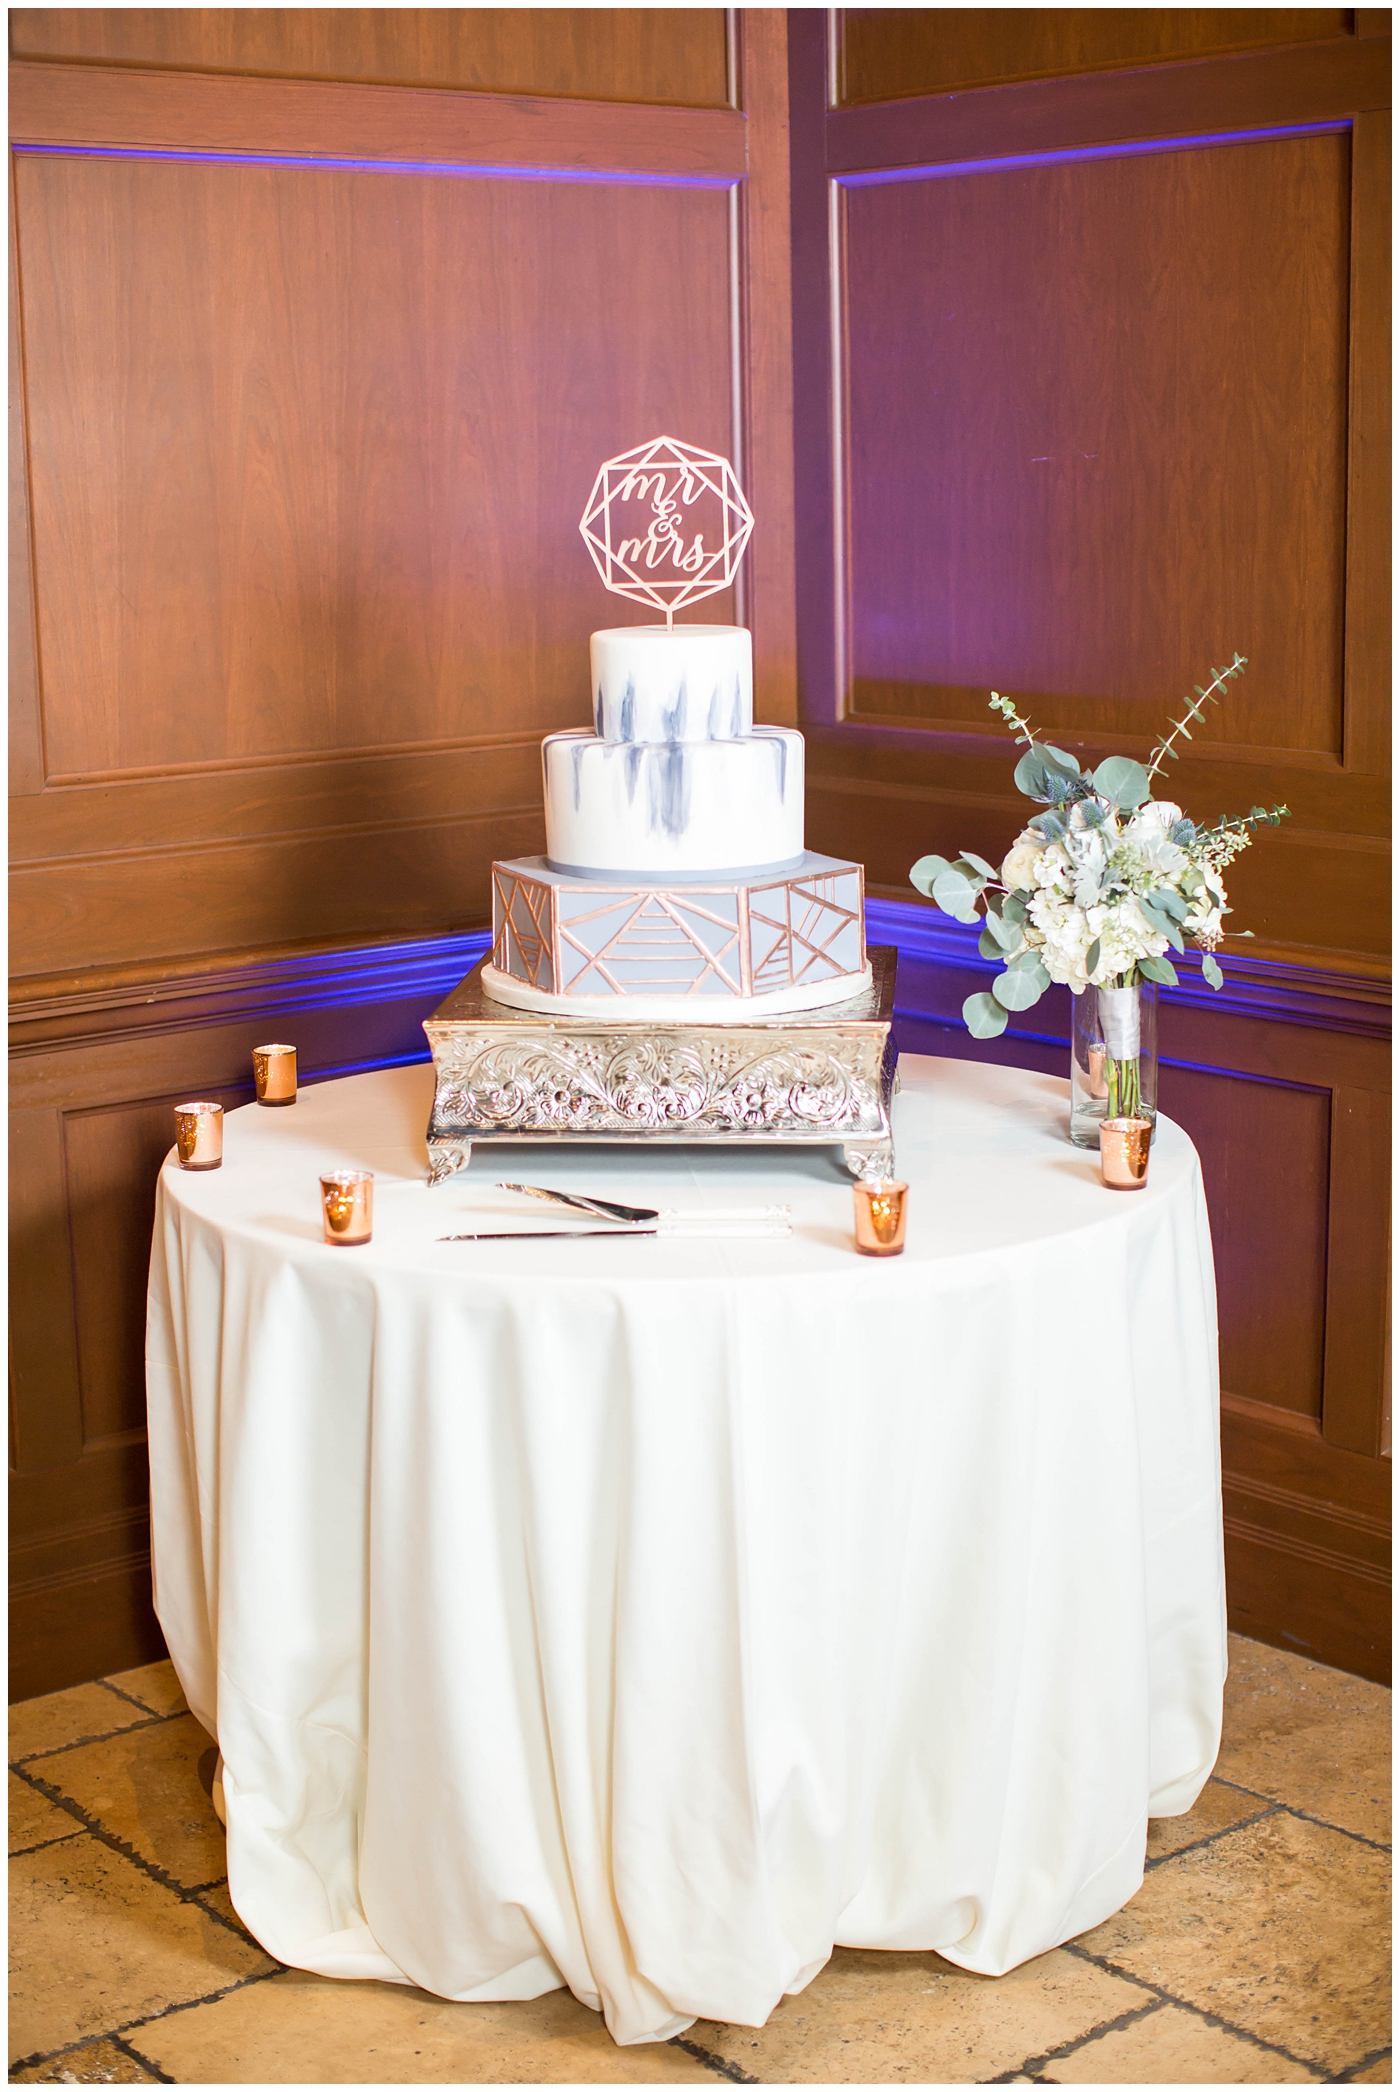 Geometric Wedding Cake with blue and copper